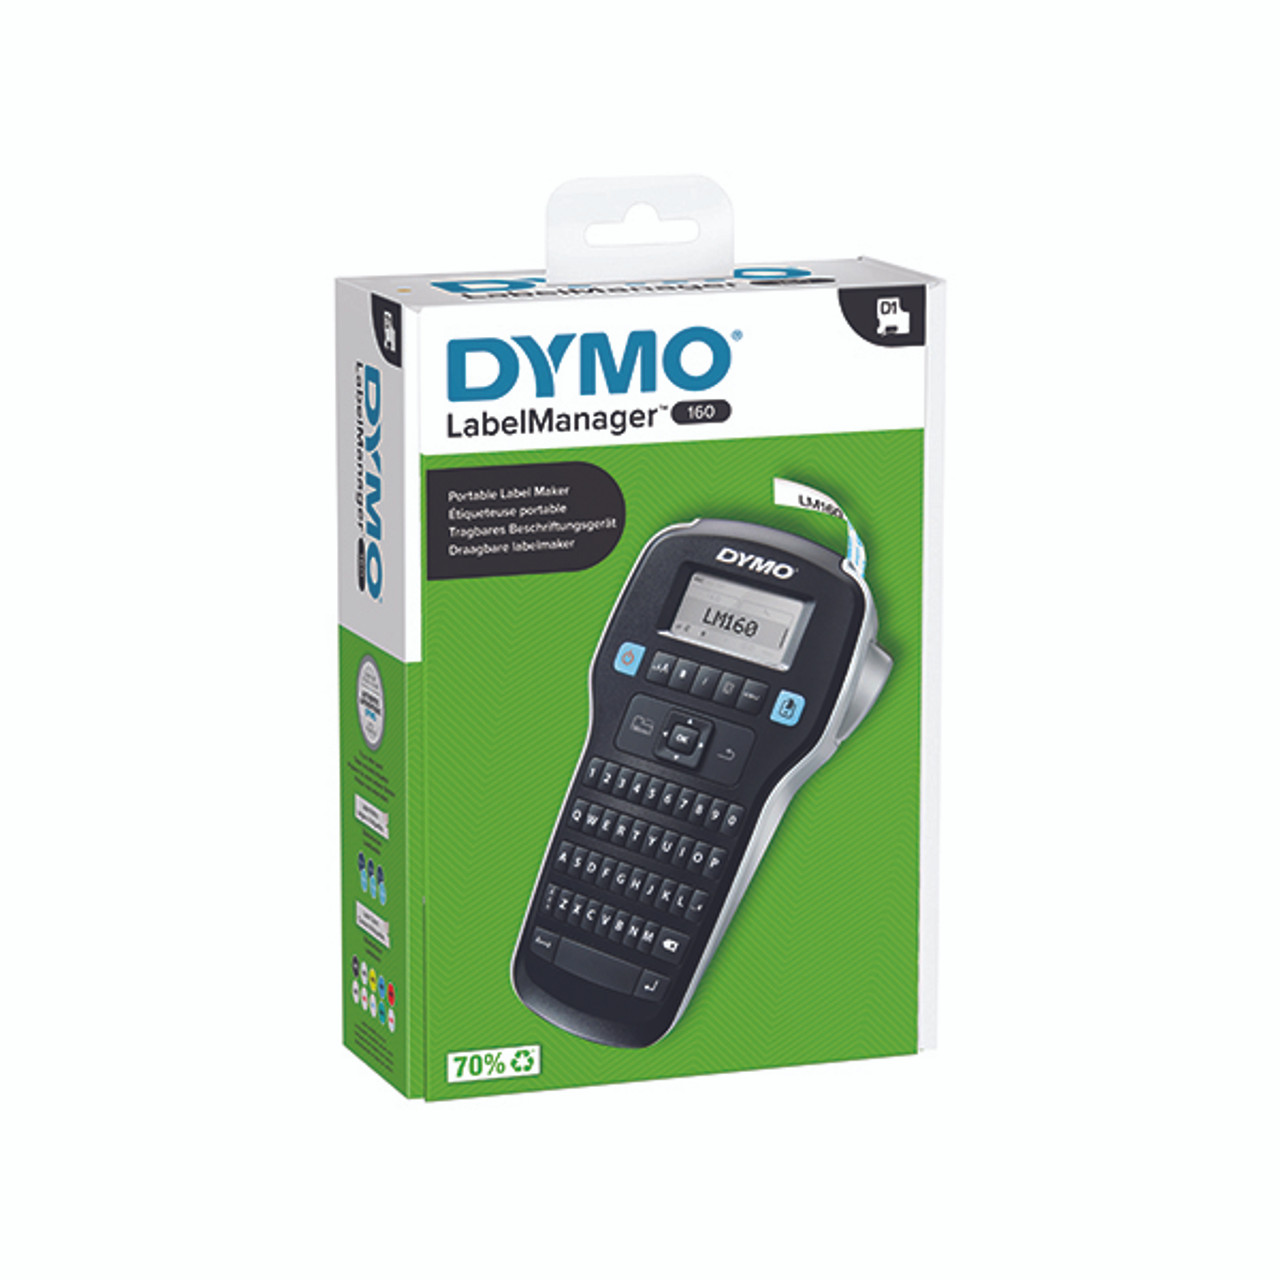 Dymo LabelManager 160 Label Marker Qwerty Keyboard 2174612 Supplies for  Schools